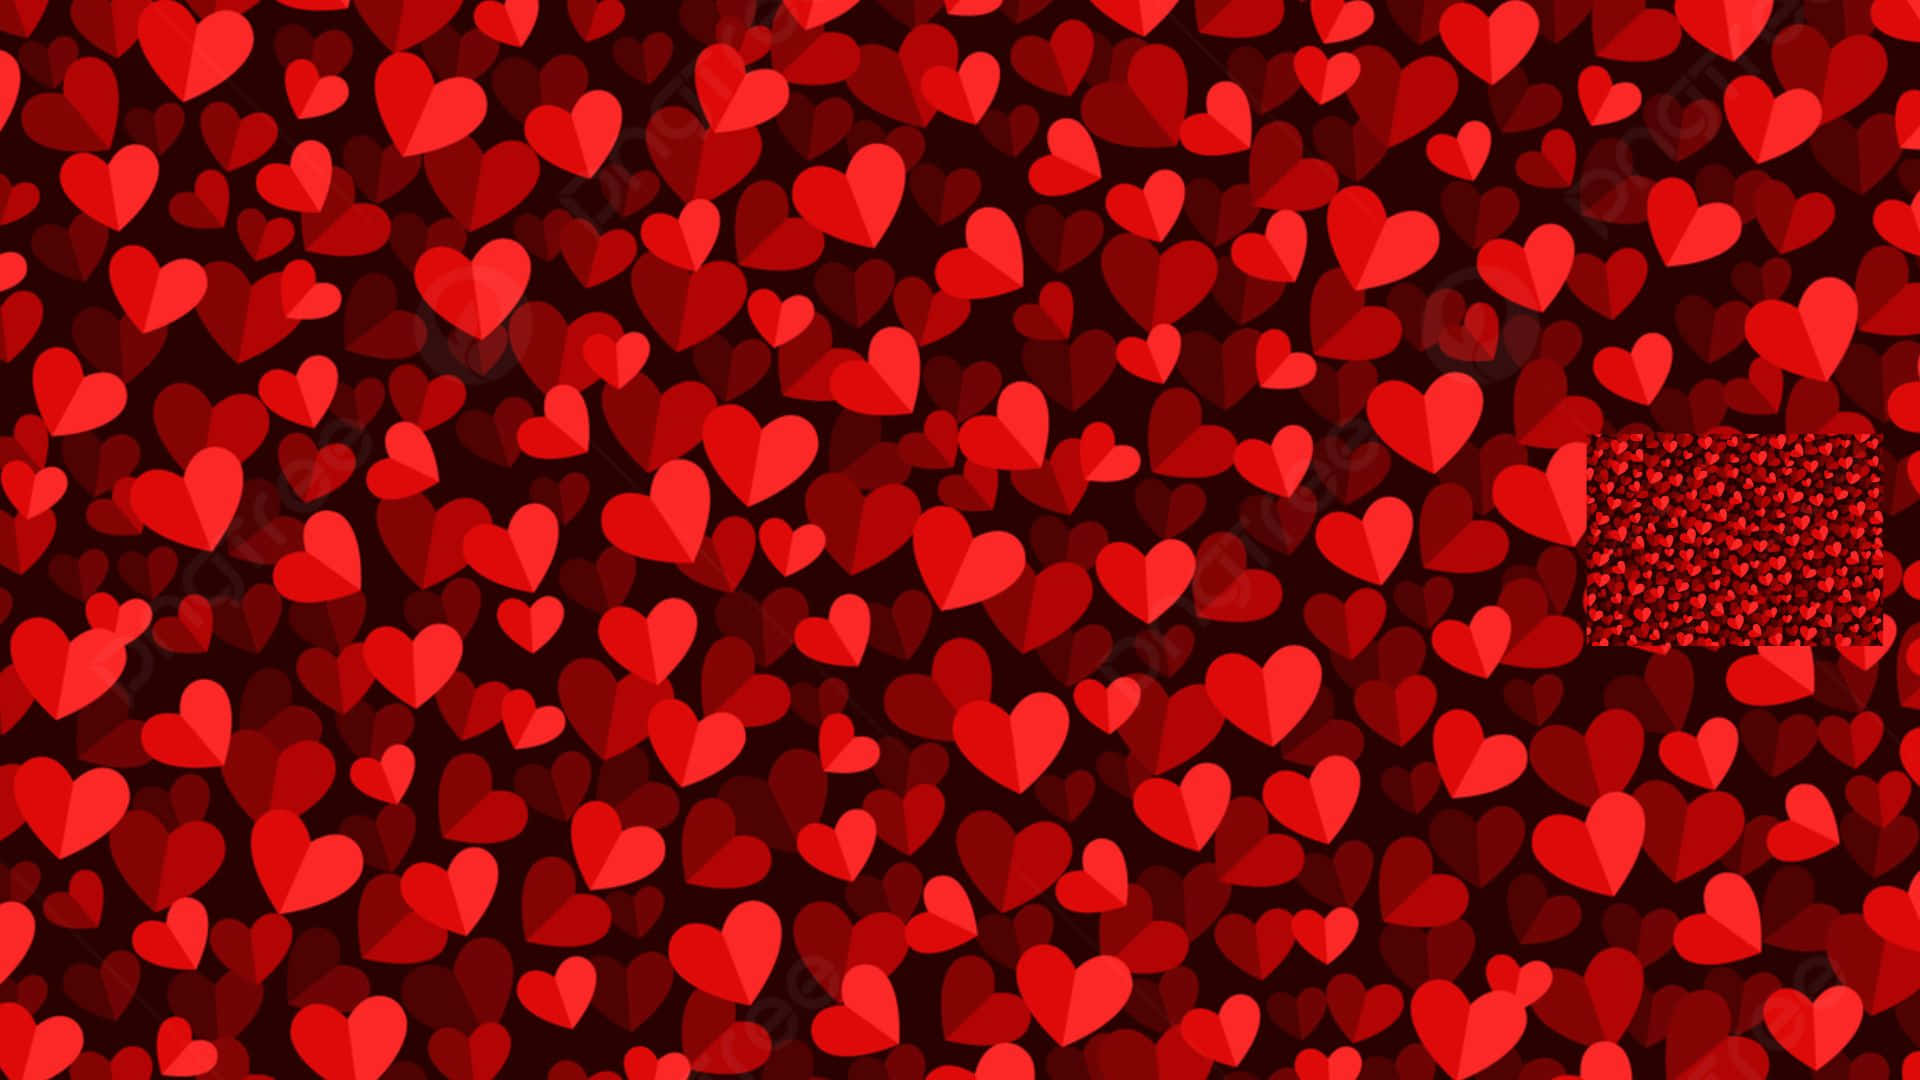 a red heart pattern with many hearts